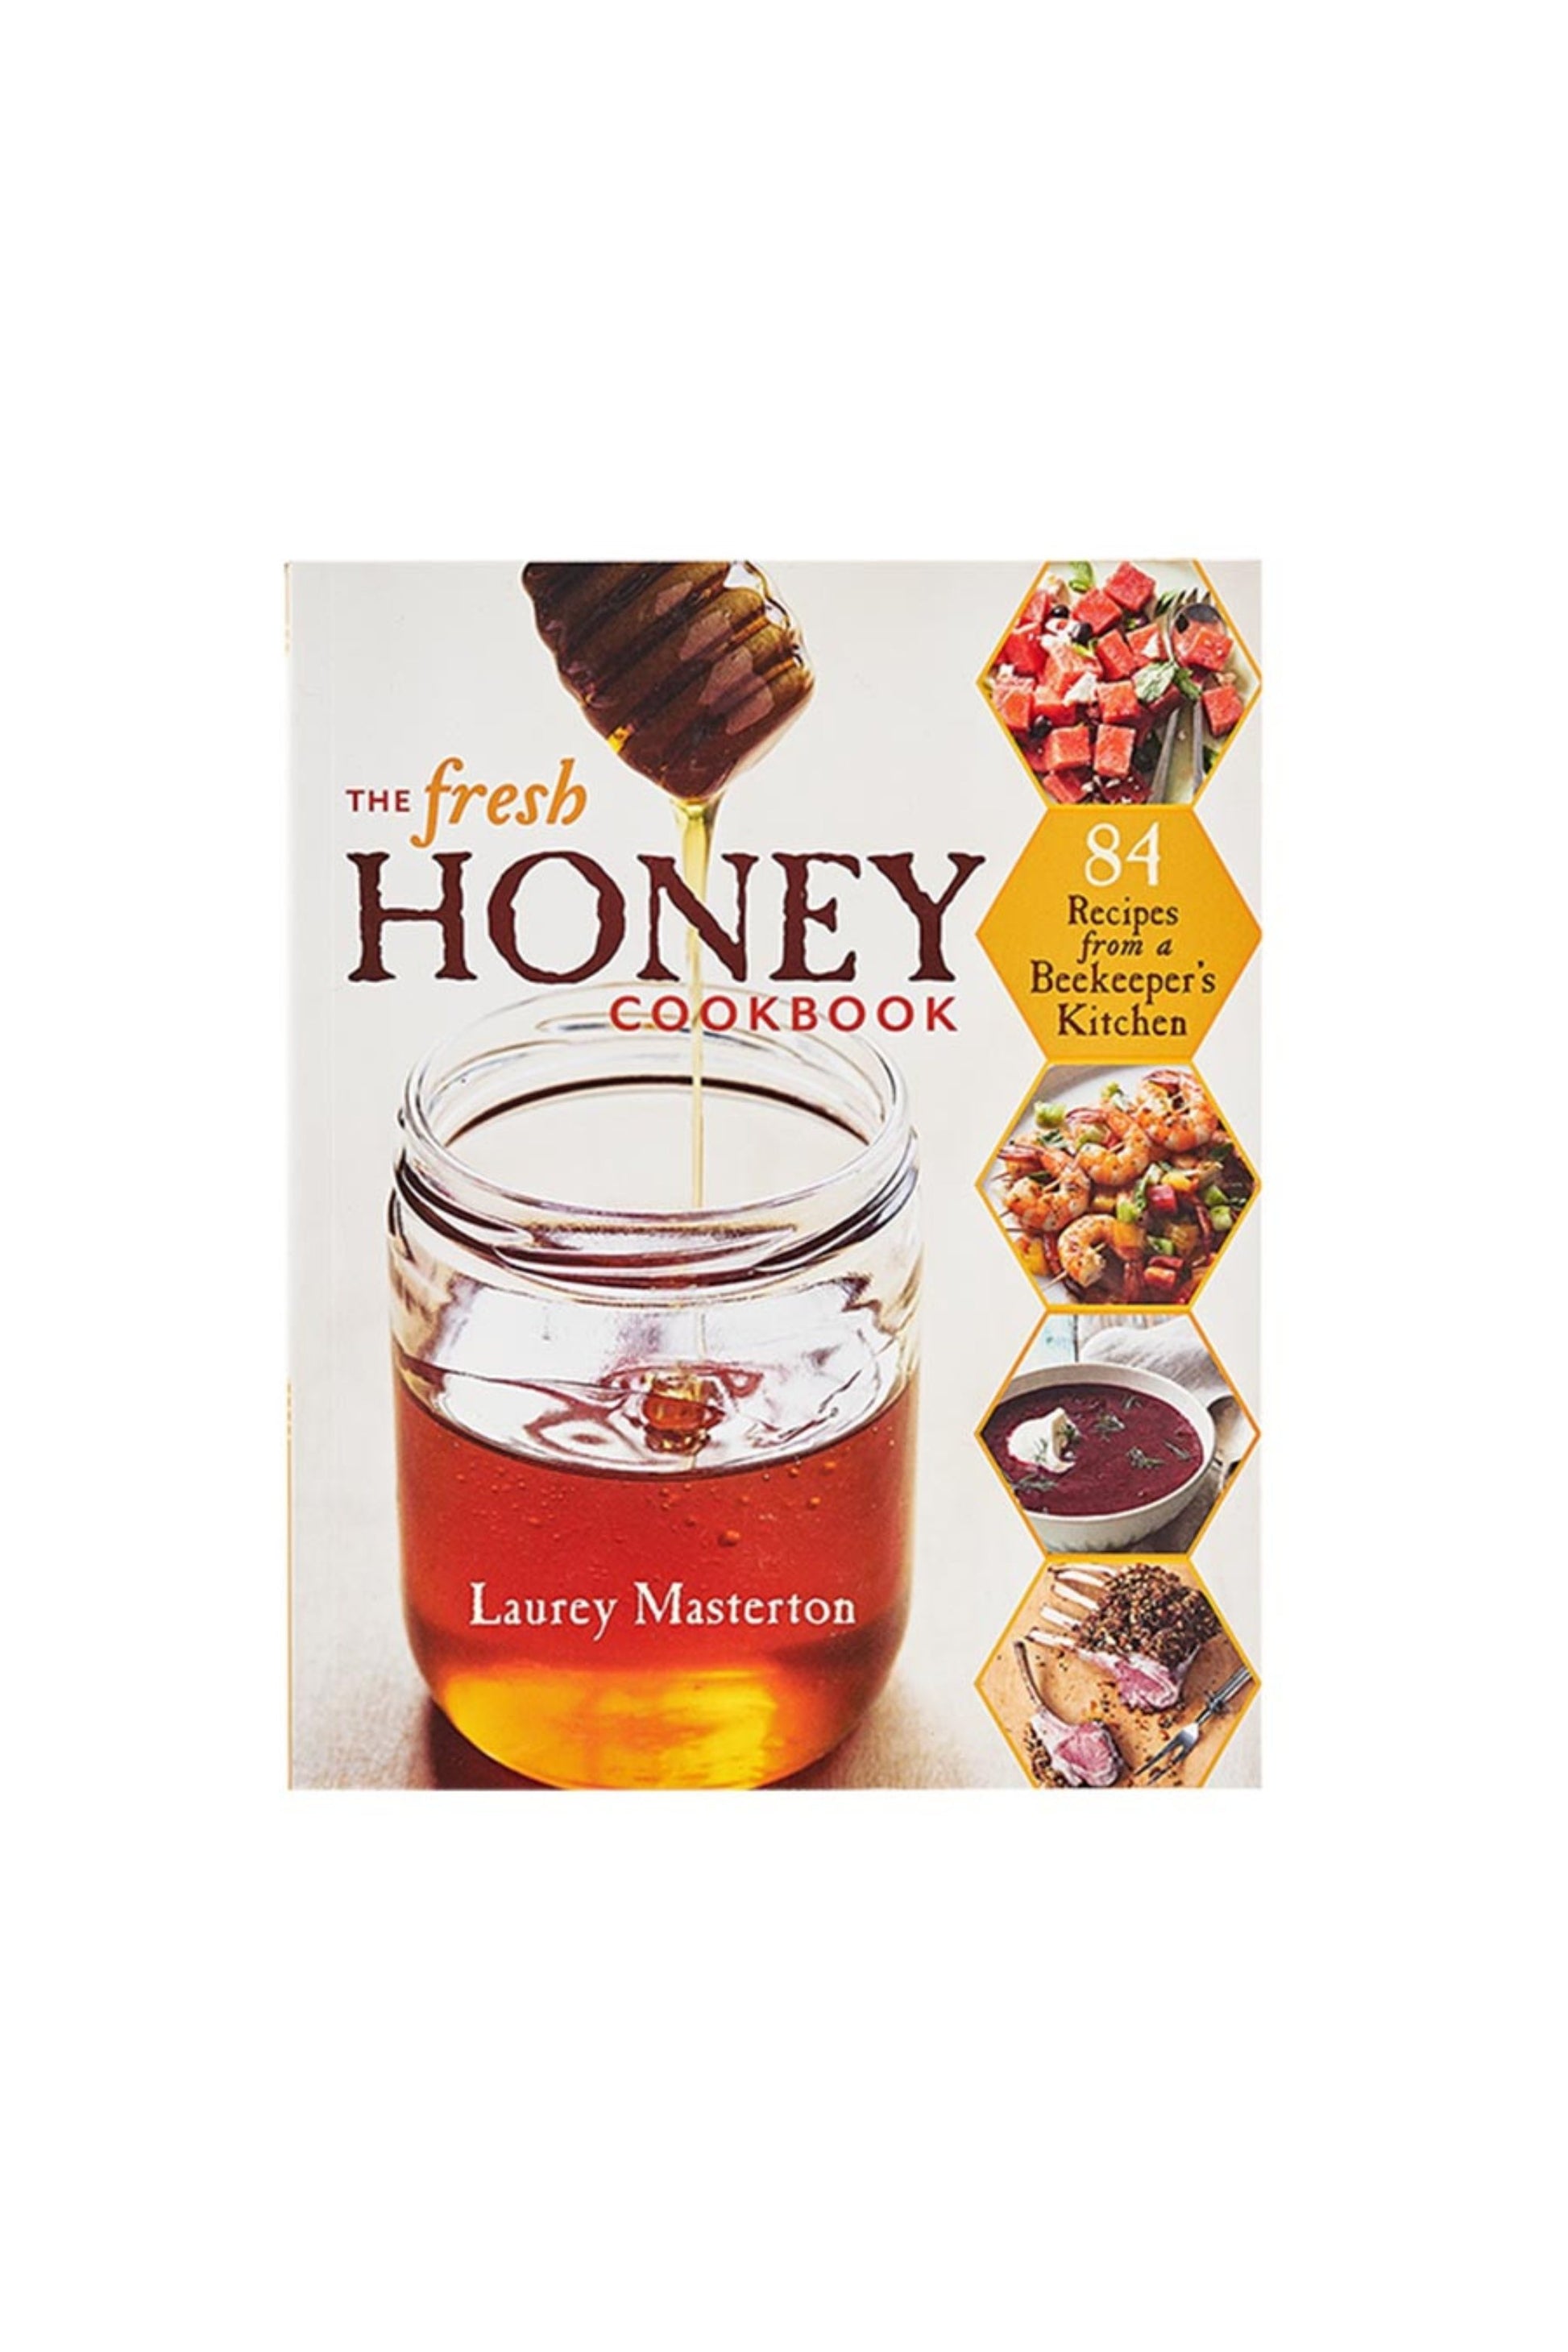 The Fresh Honey Cookbook has Recipes from a Beekeeper's kitchen.  